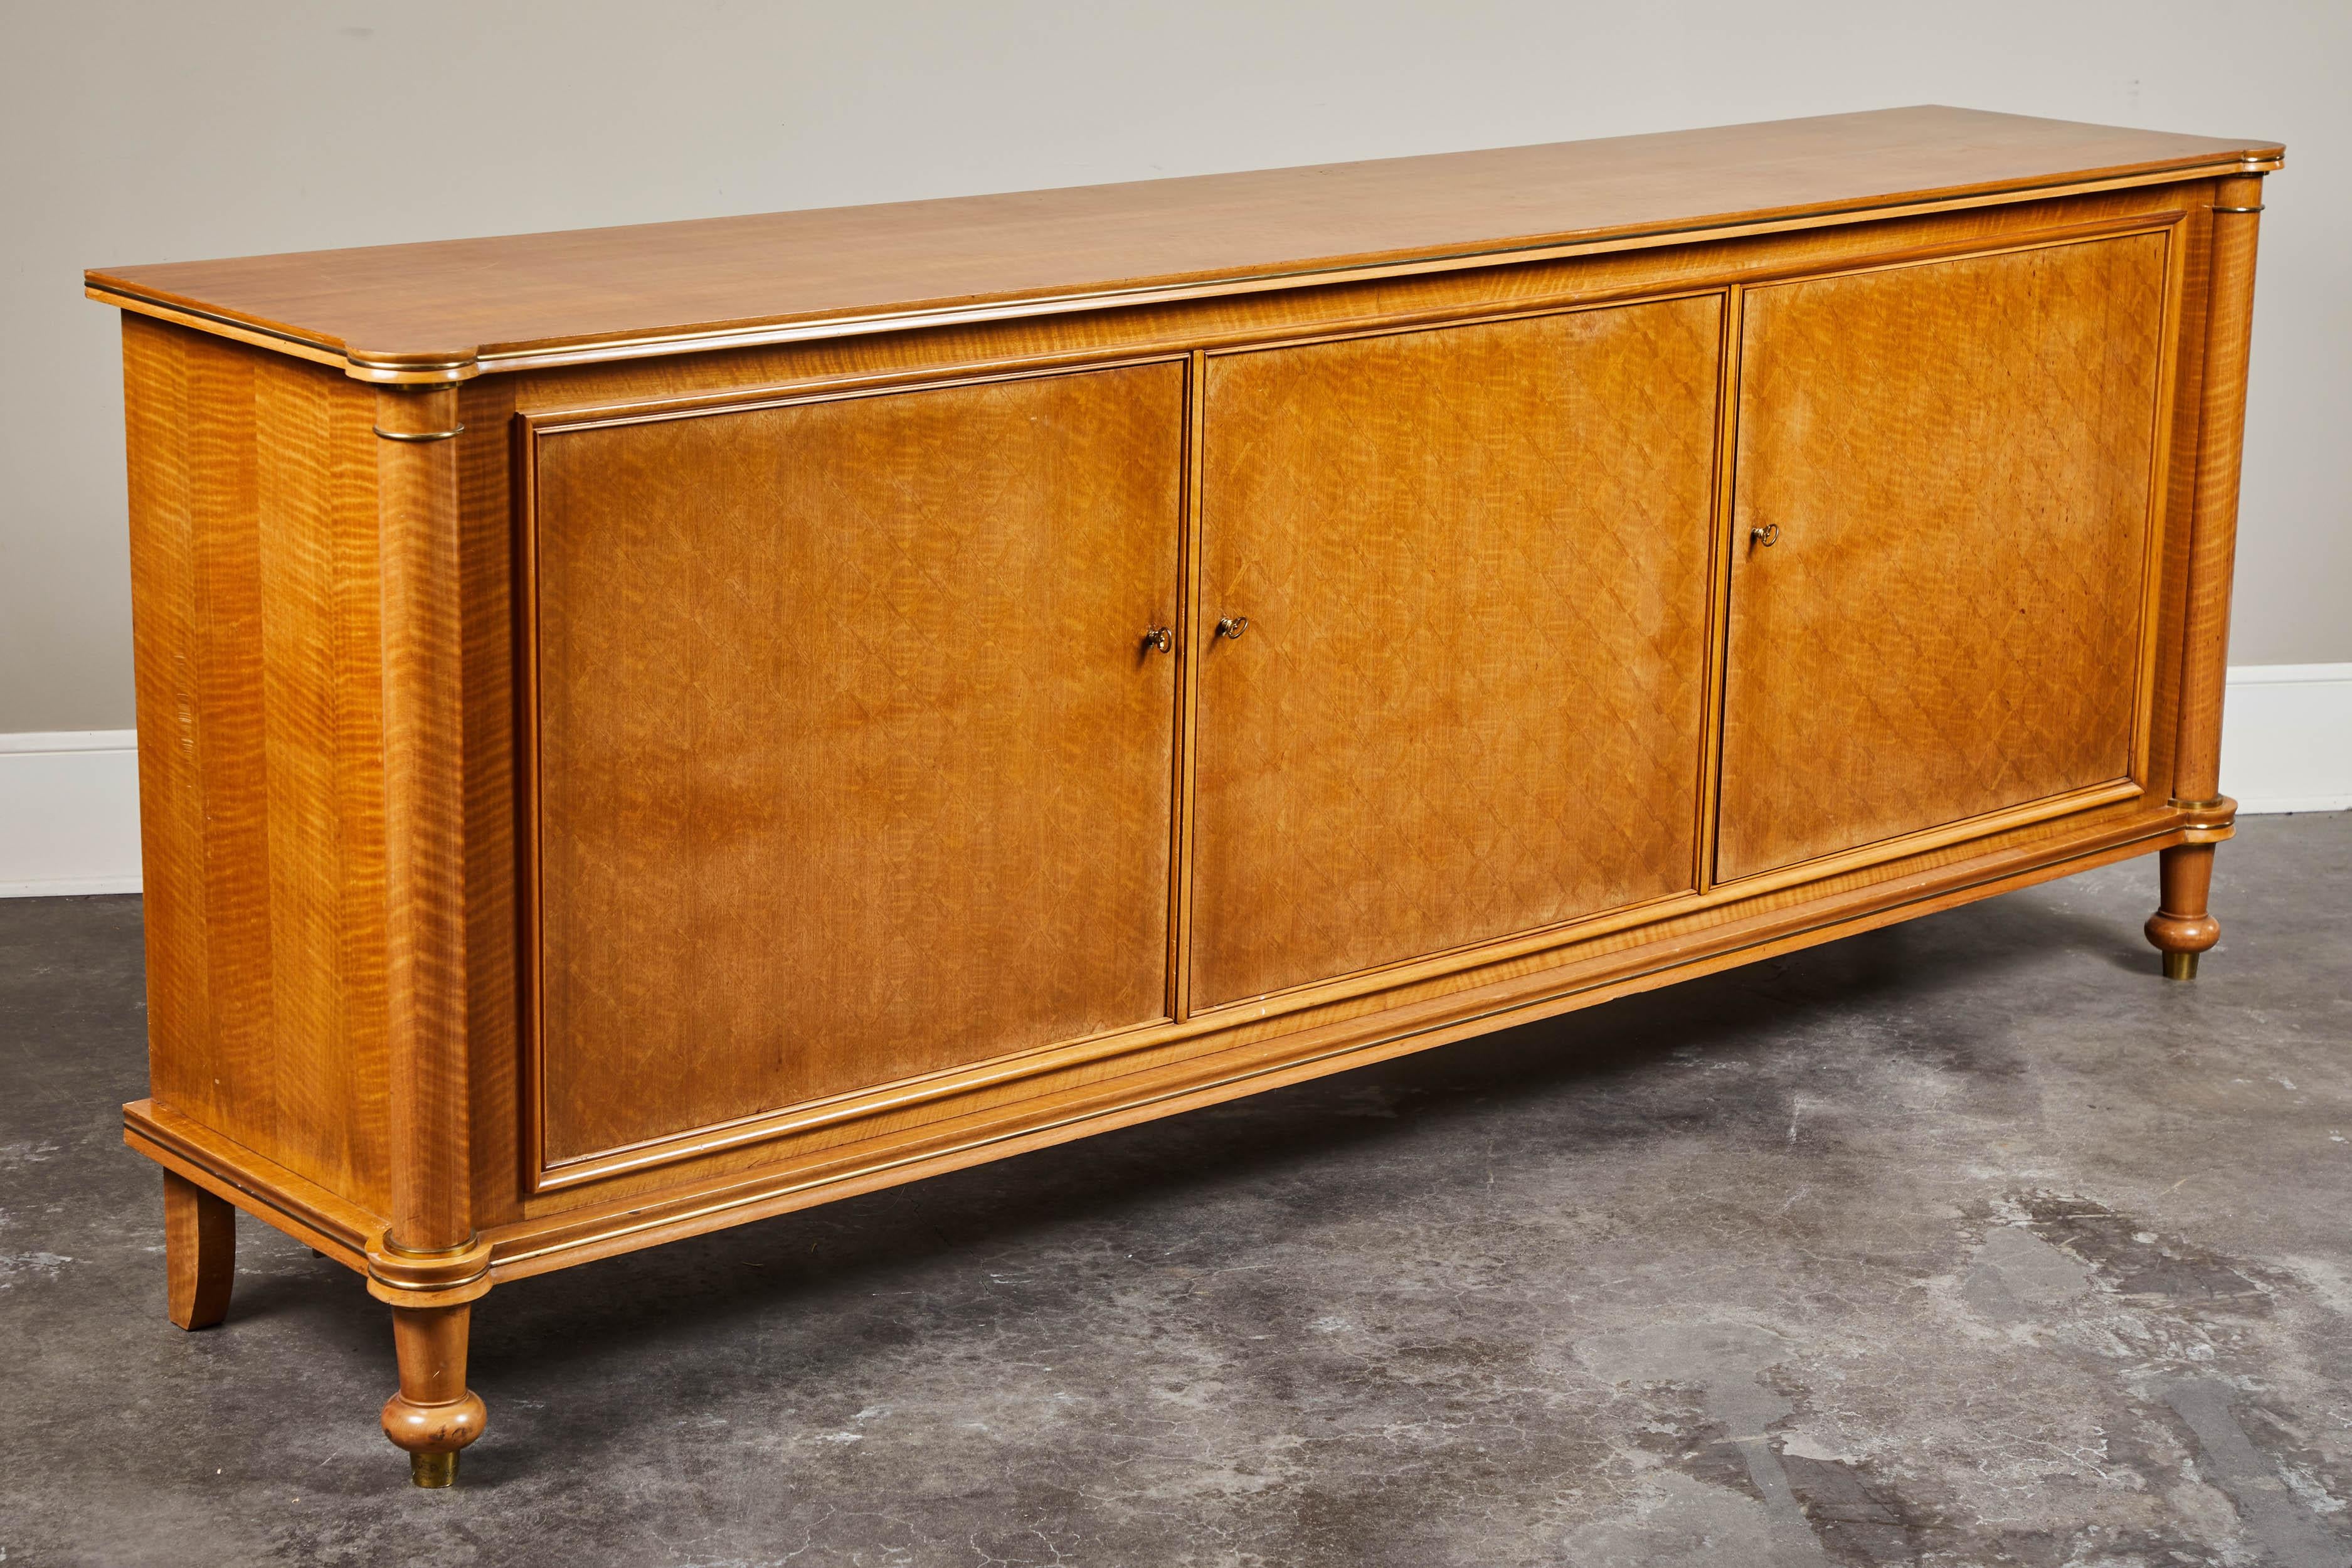 A sideboard signed and dated by the renowned Jules Leleu. Figured French Walnut on oak body, with three doors and two small drawers at centre interior. Features brass detailing throughout and impeccable attention to detail. Dated June, 1955, Paris.